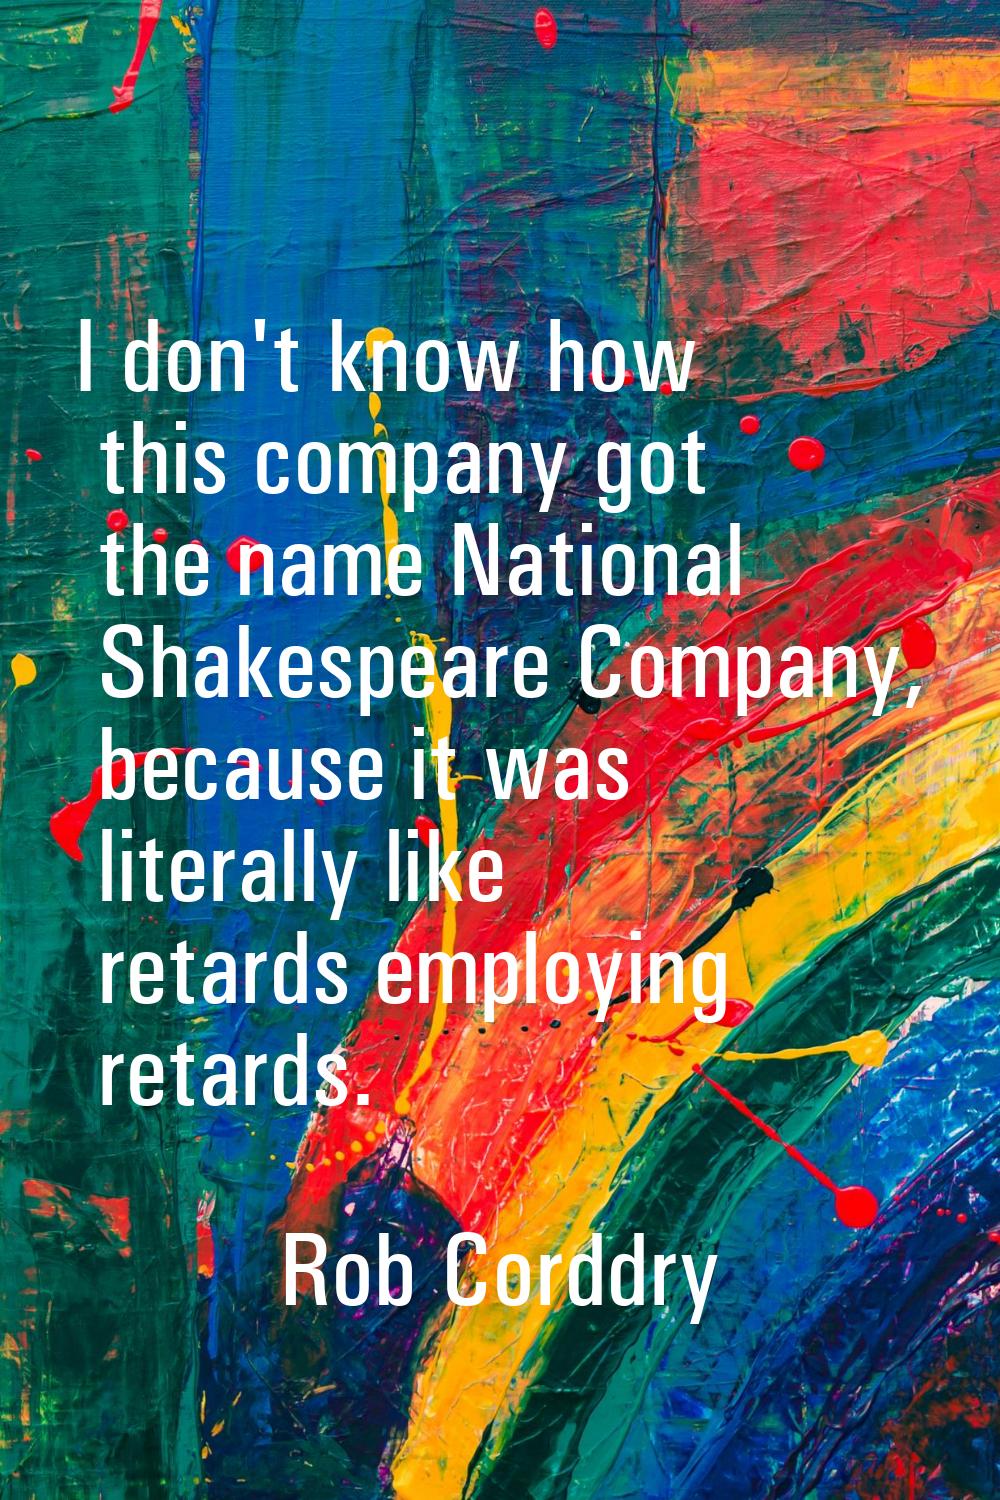 I don't know how this company got the name National Shakespeare Company, because it was literally l